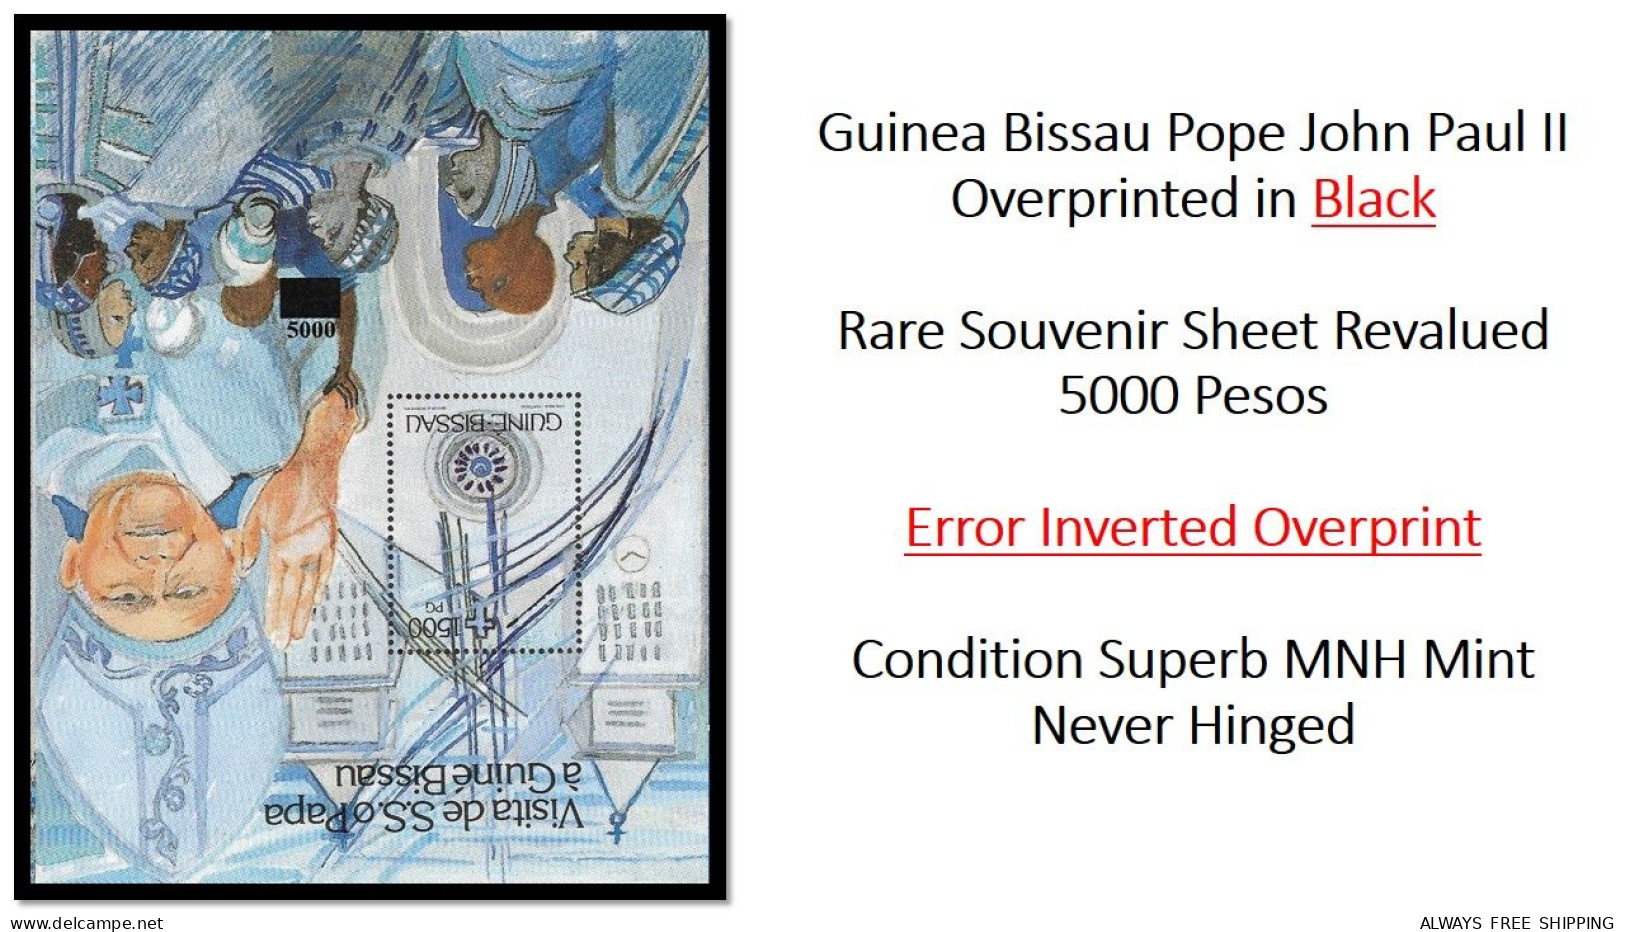 Guinea Bissau 1999 His Holiness Pope John Paul II - Error Overprint Inverted Surcharge Rare Only 5 Exist MNH - Papes